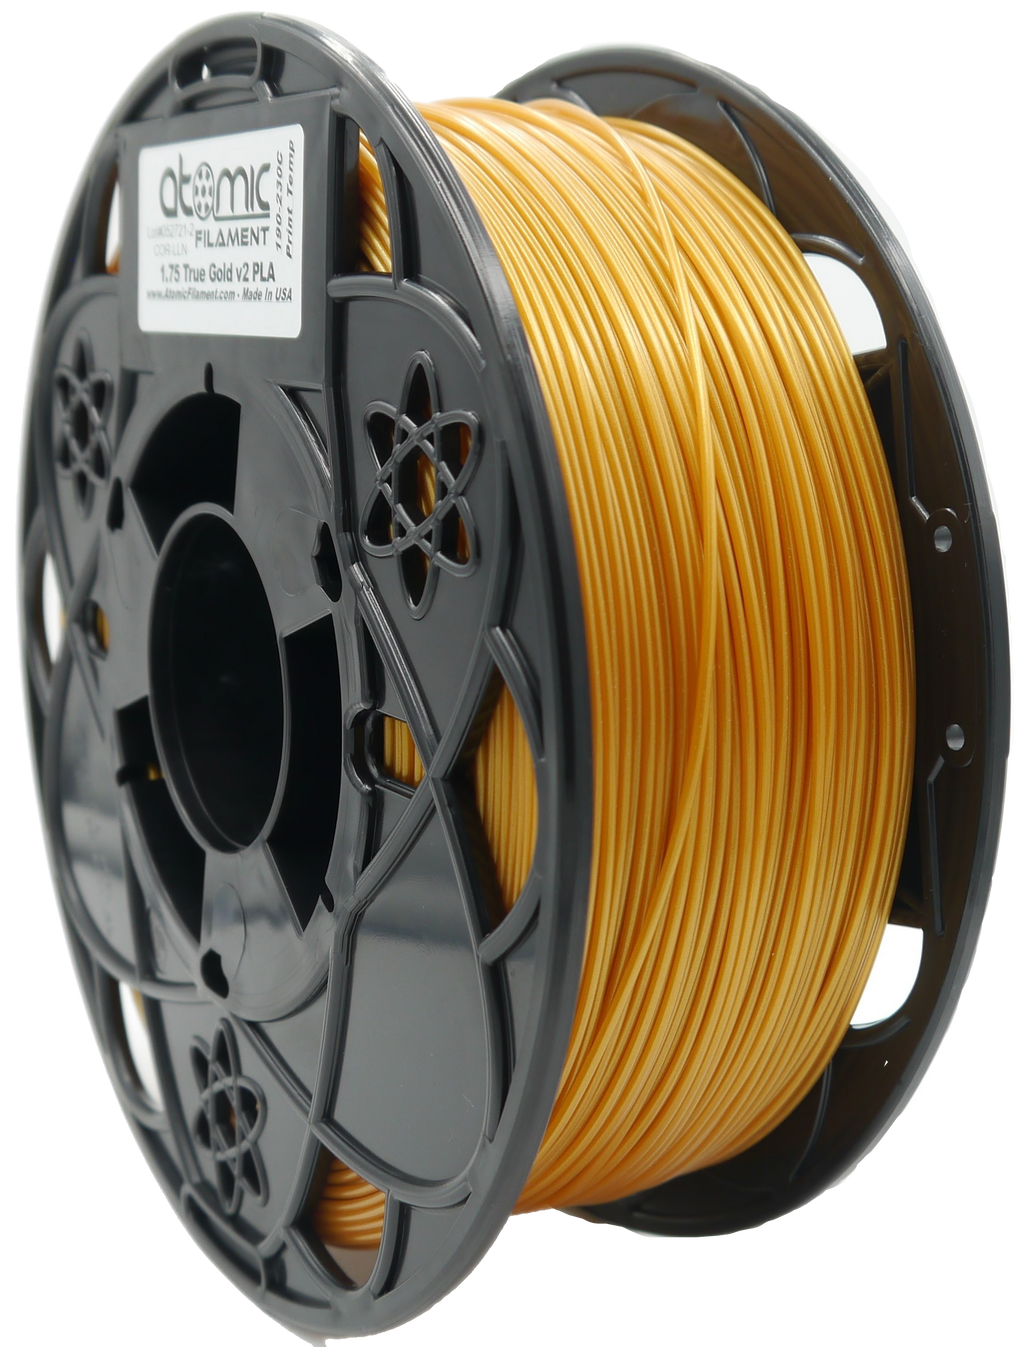 PLA Filament, Made in the USA